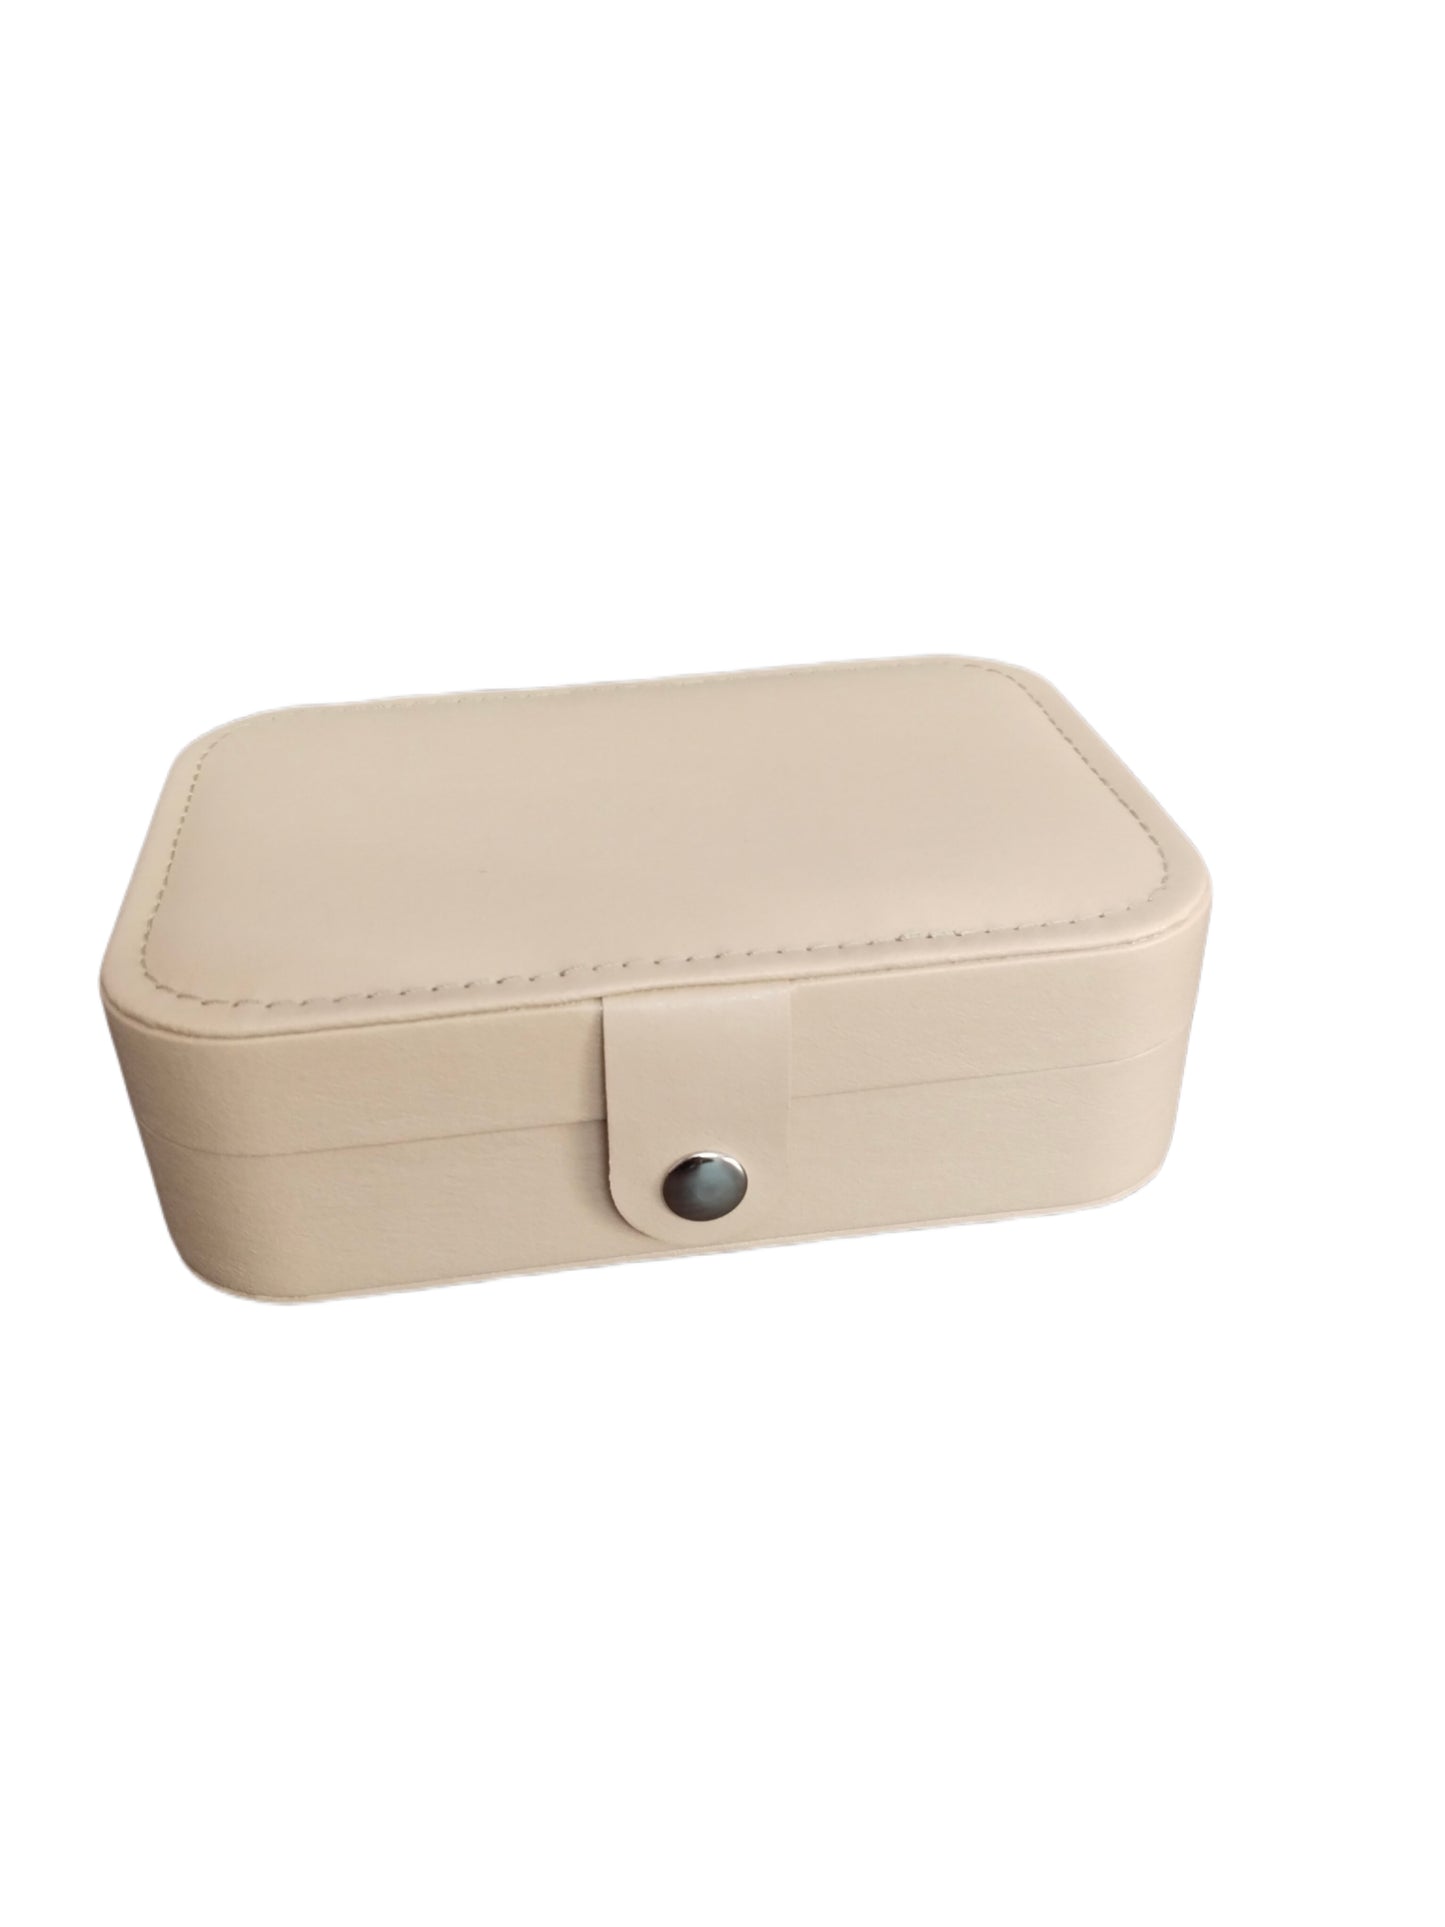 Beige-color-jewellery-box-filled-with-earrings-and-rings jewellery-box-design Travel-jewellery-box